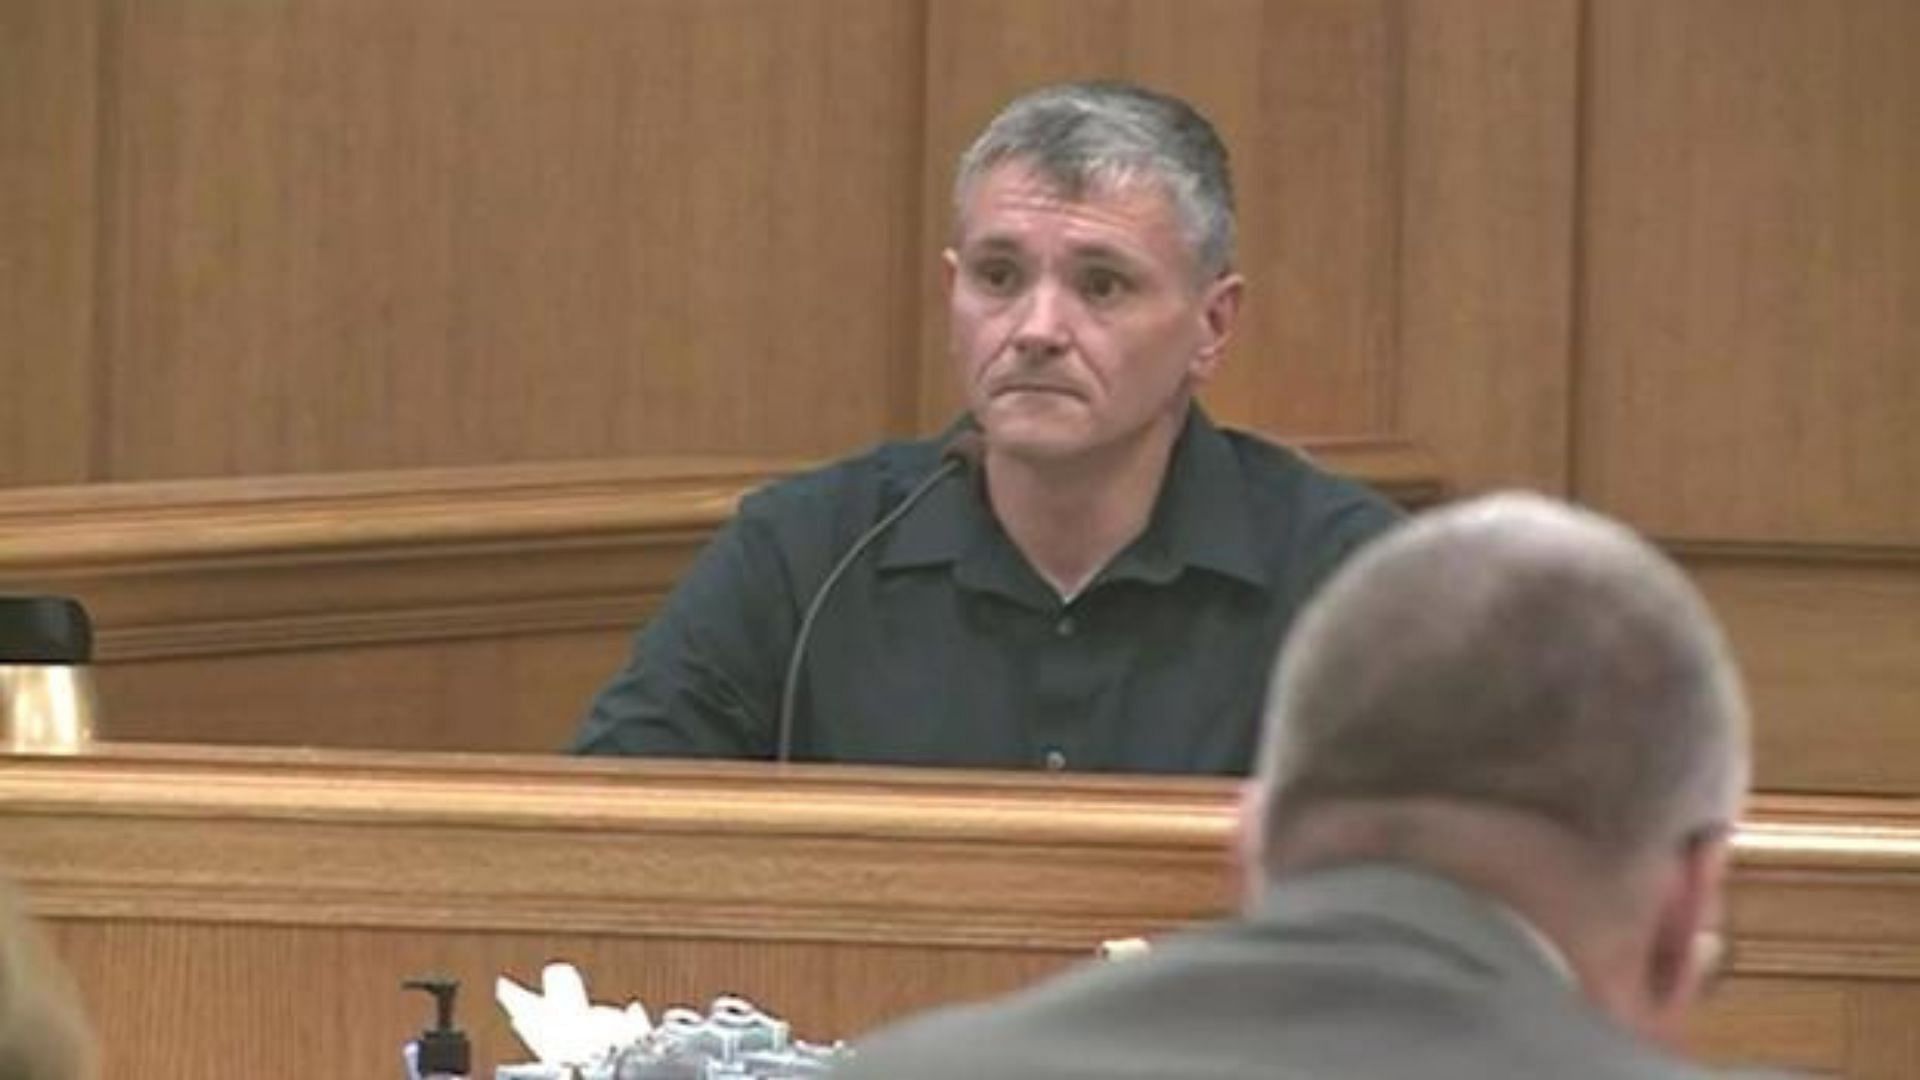 A still of Todd Kendhammer in courtroom (Via CBS News)